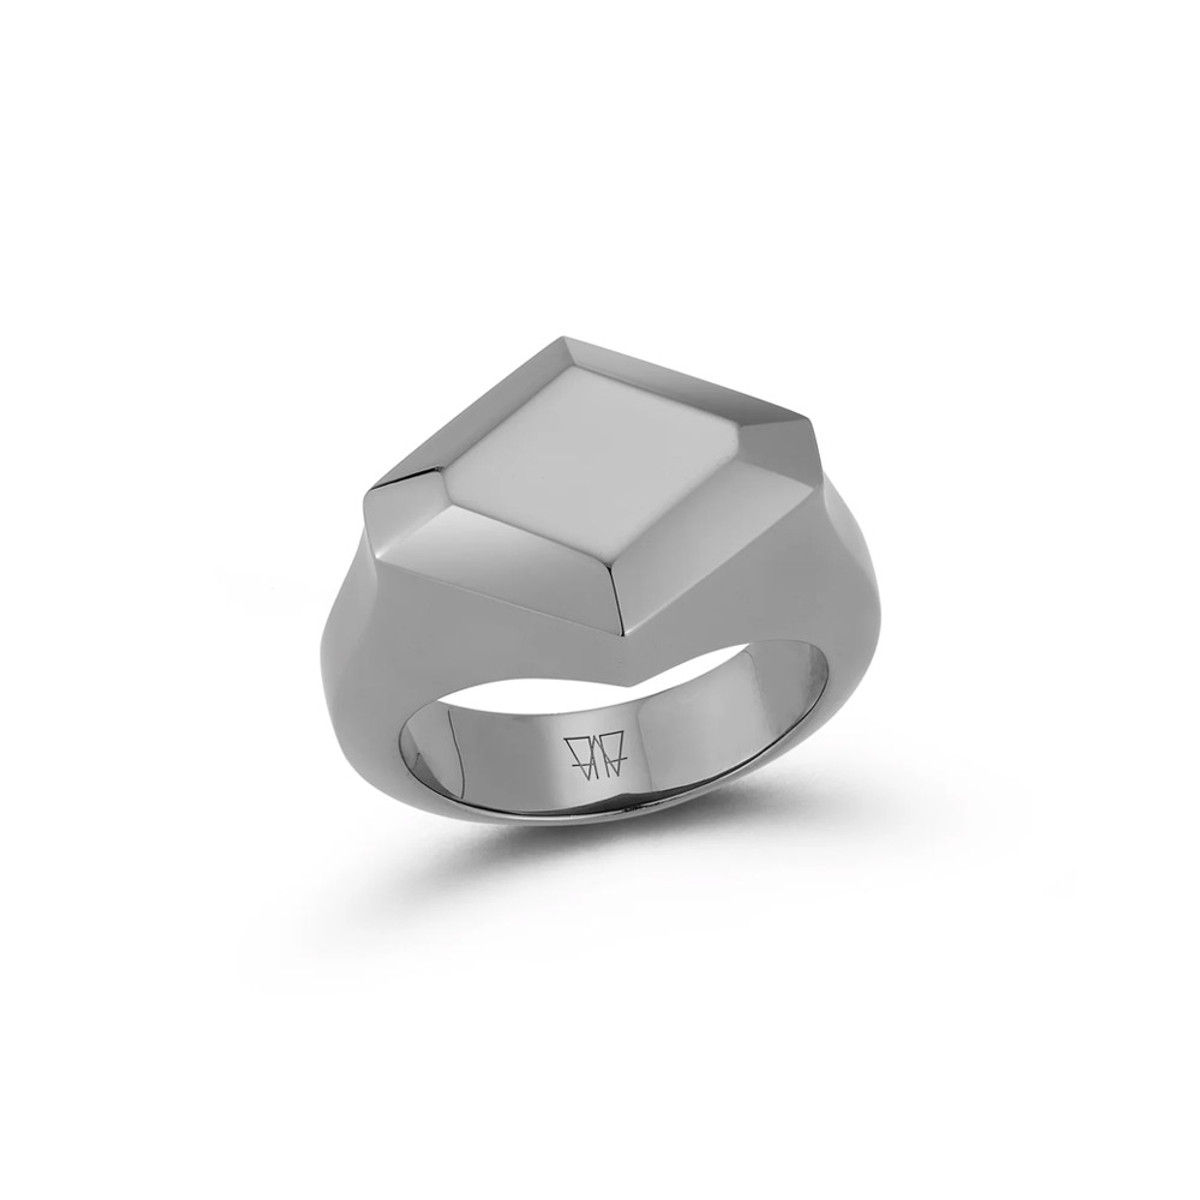 Walters Faith Quentin Sterling Silver and Black Rhodium Faceted Hexagon Signet Ring- Size 8.5-56159